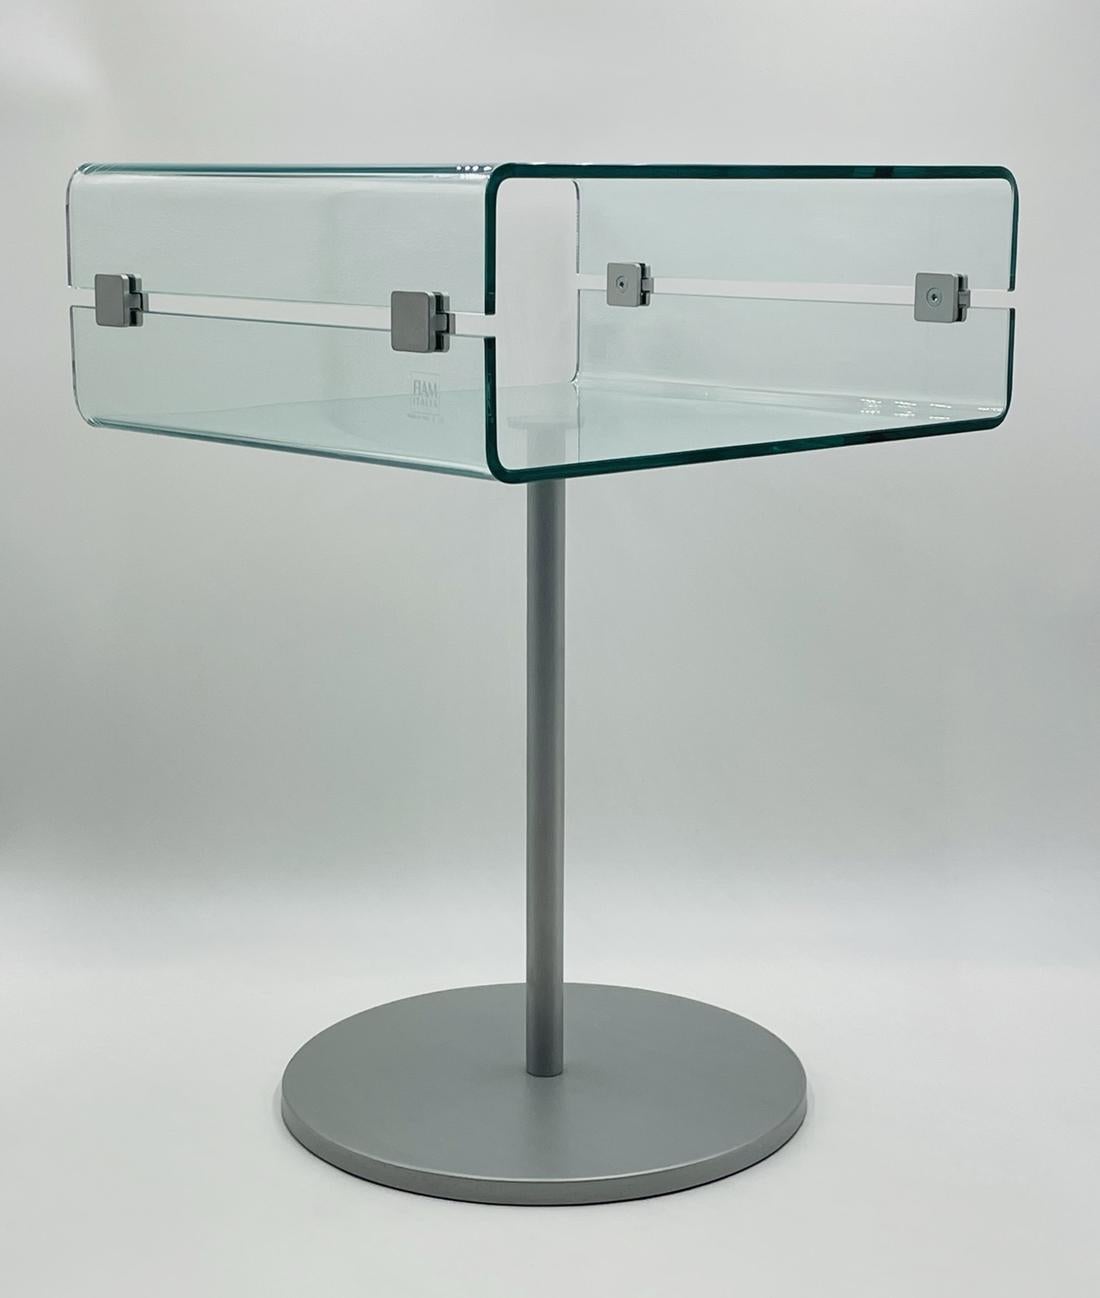 Christophe Pillet C&C Night table. 20th century. Made by Fiam Italia. 

Table having a curved glass top with aluminum hardware raised on a metal base with an aluminum finish.

Marked 